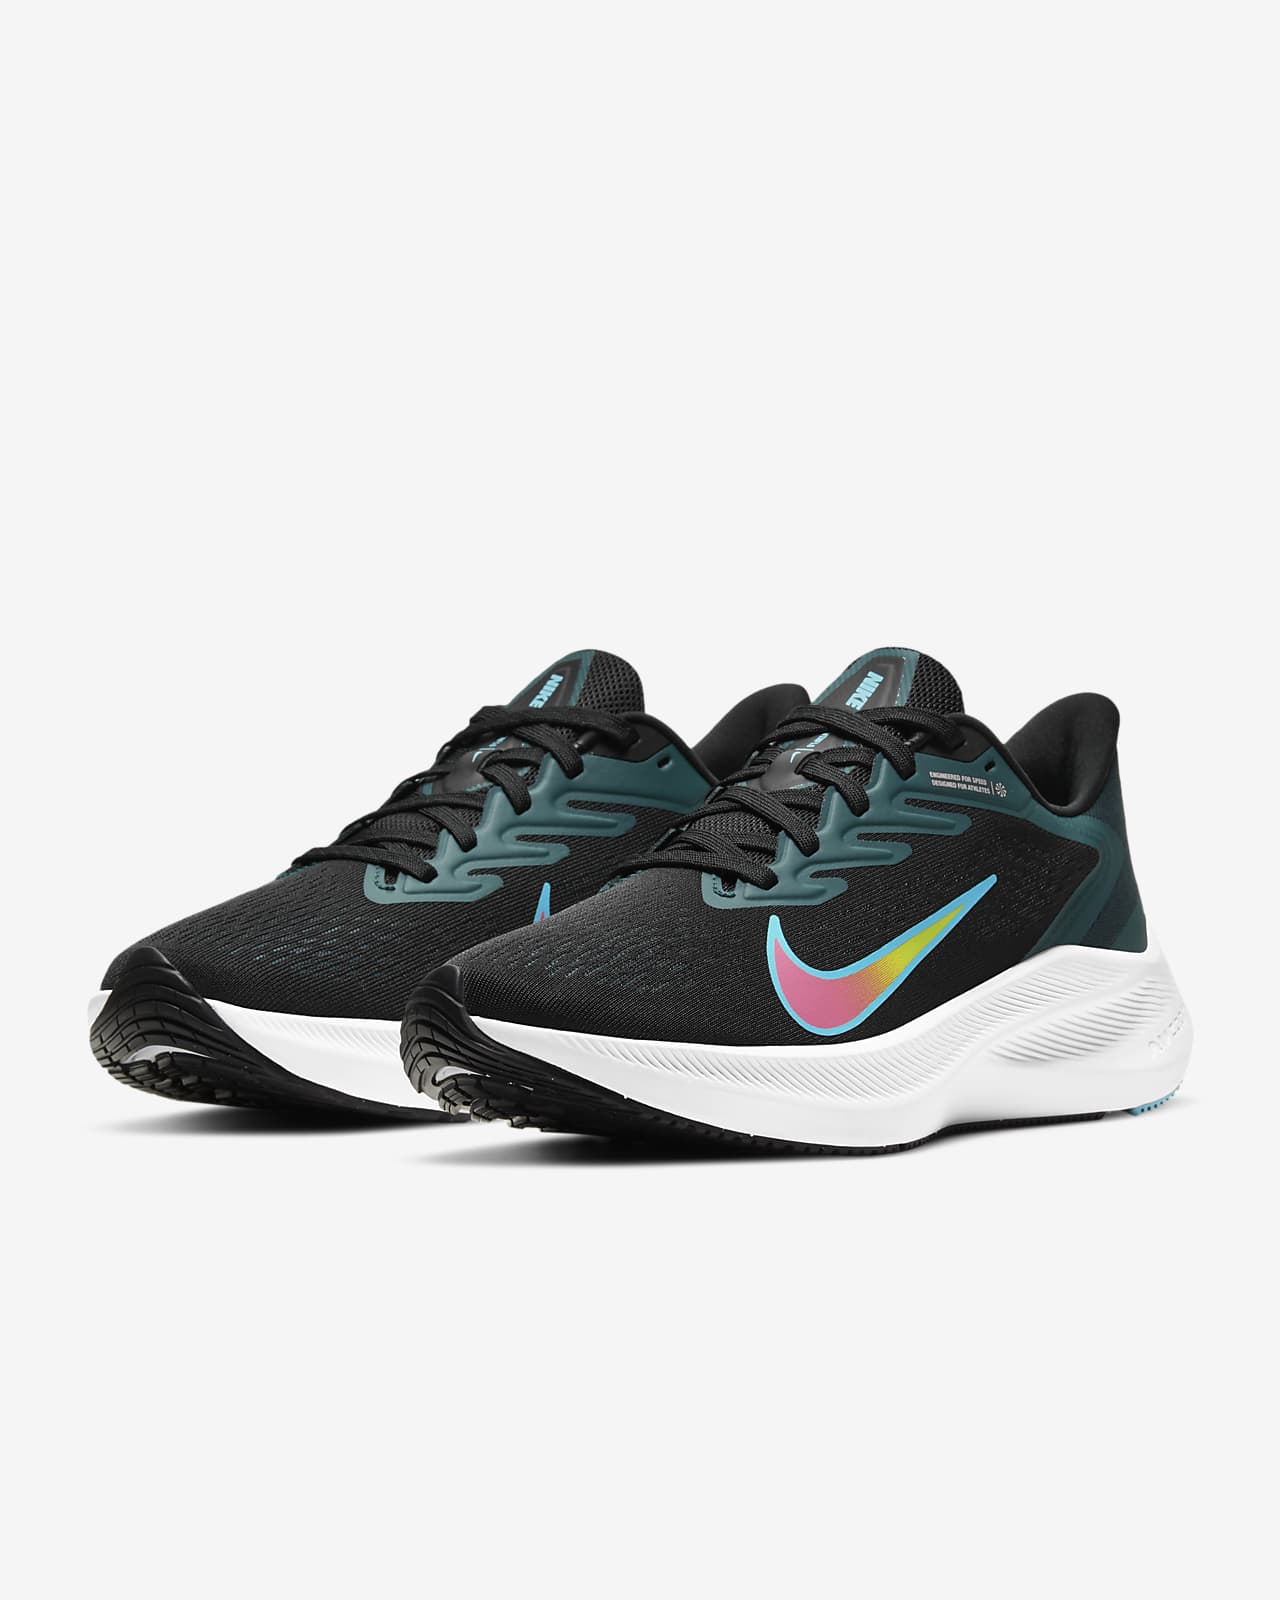 teal shoes nike